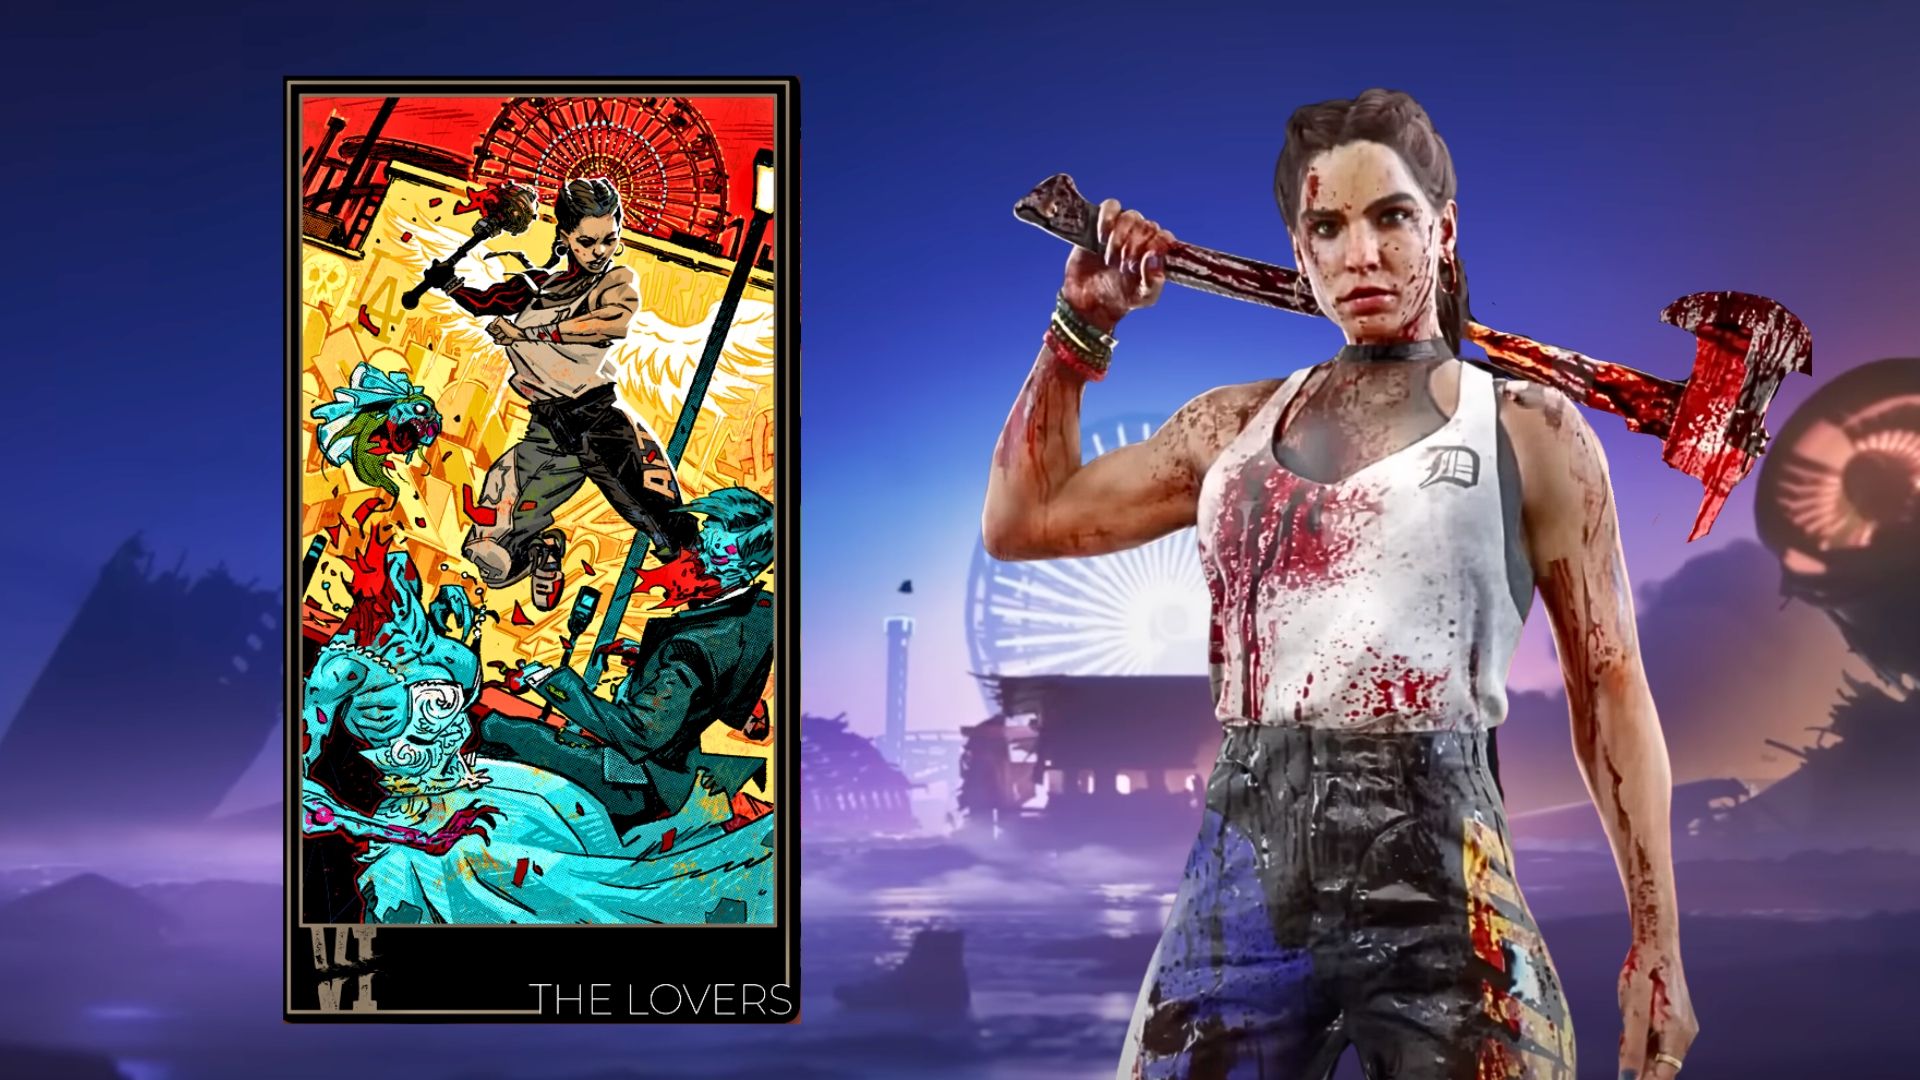 Carla Character Image and Card from Dead Island 2